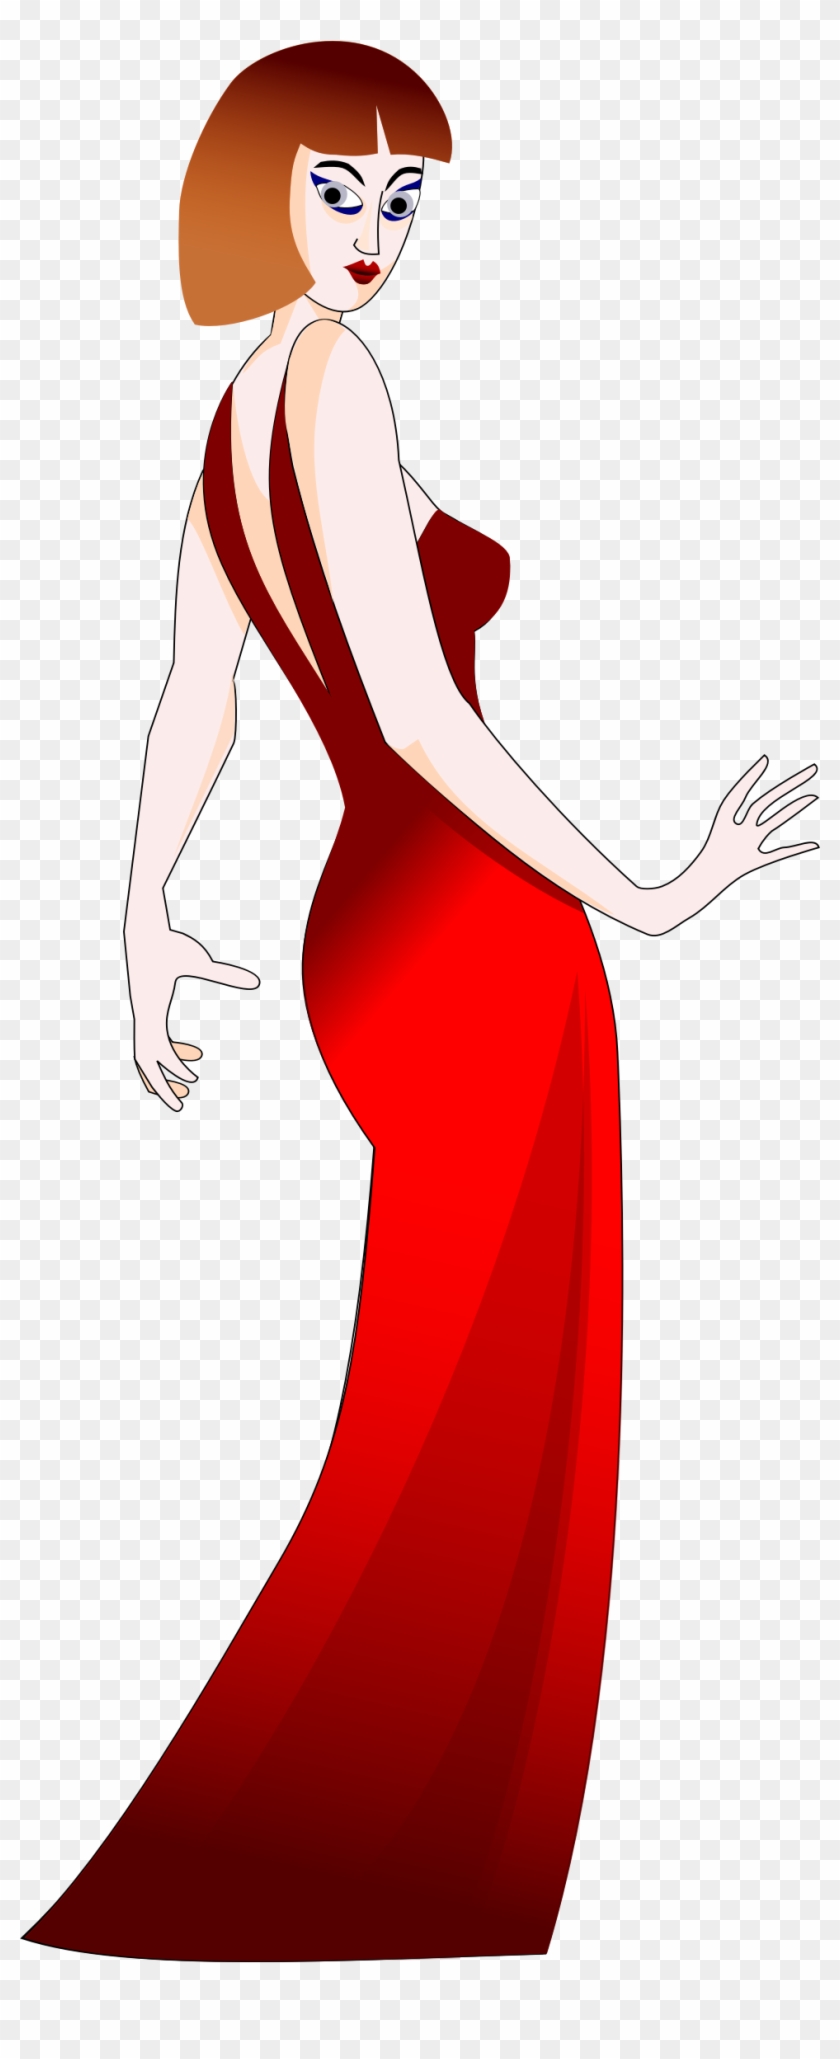 Woman In Red Dress - Woman #874259